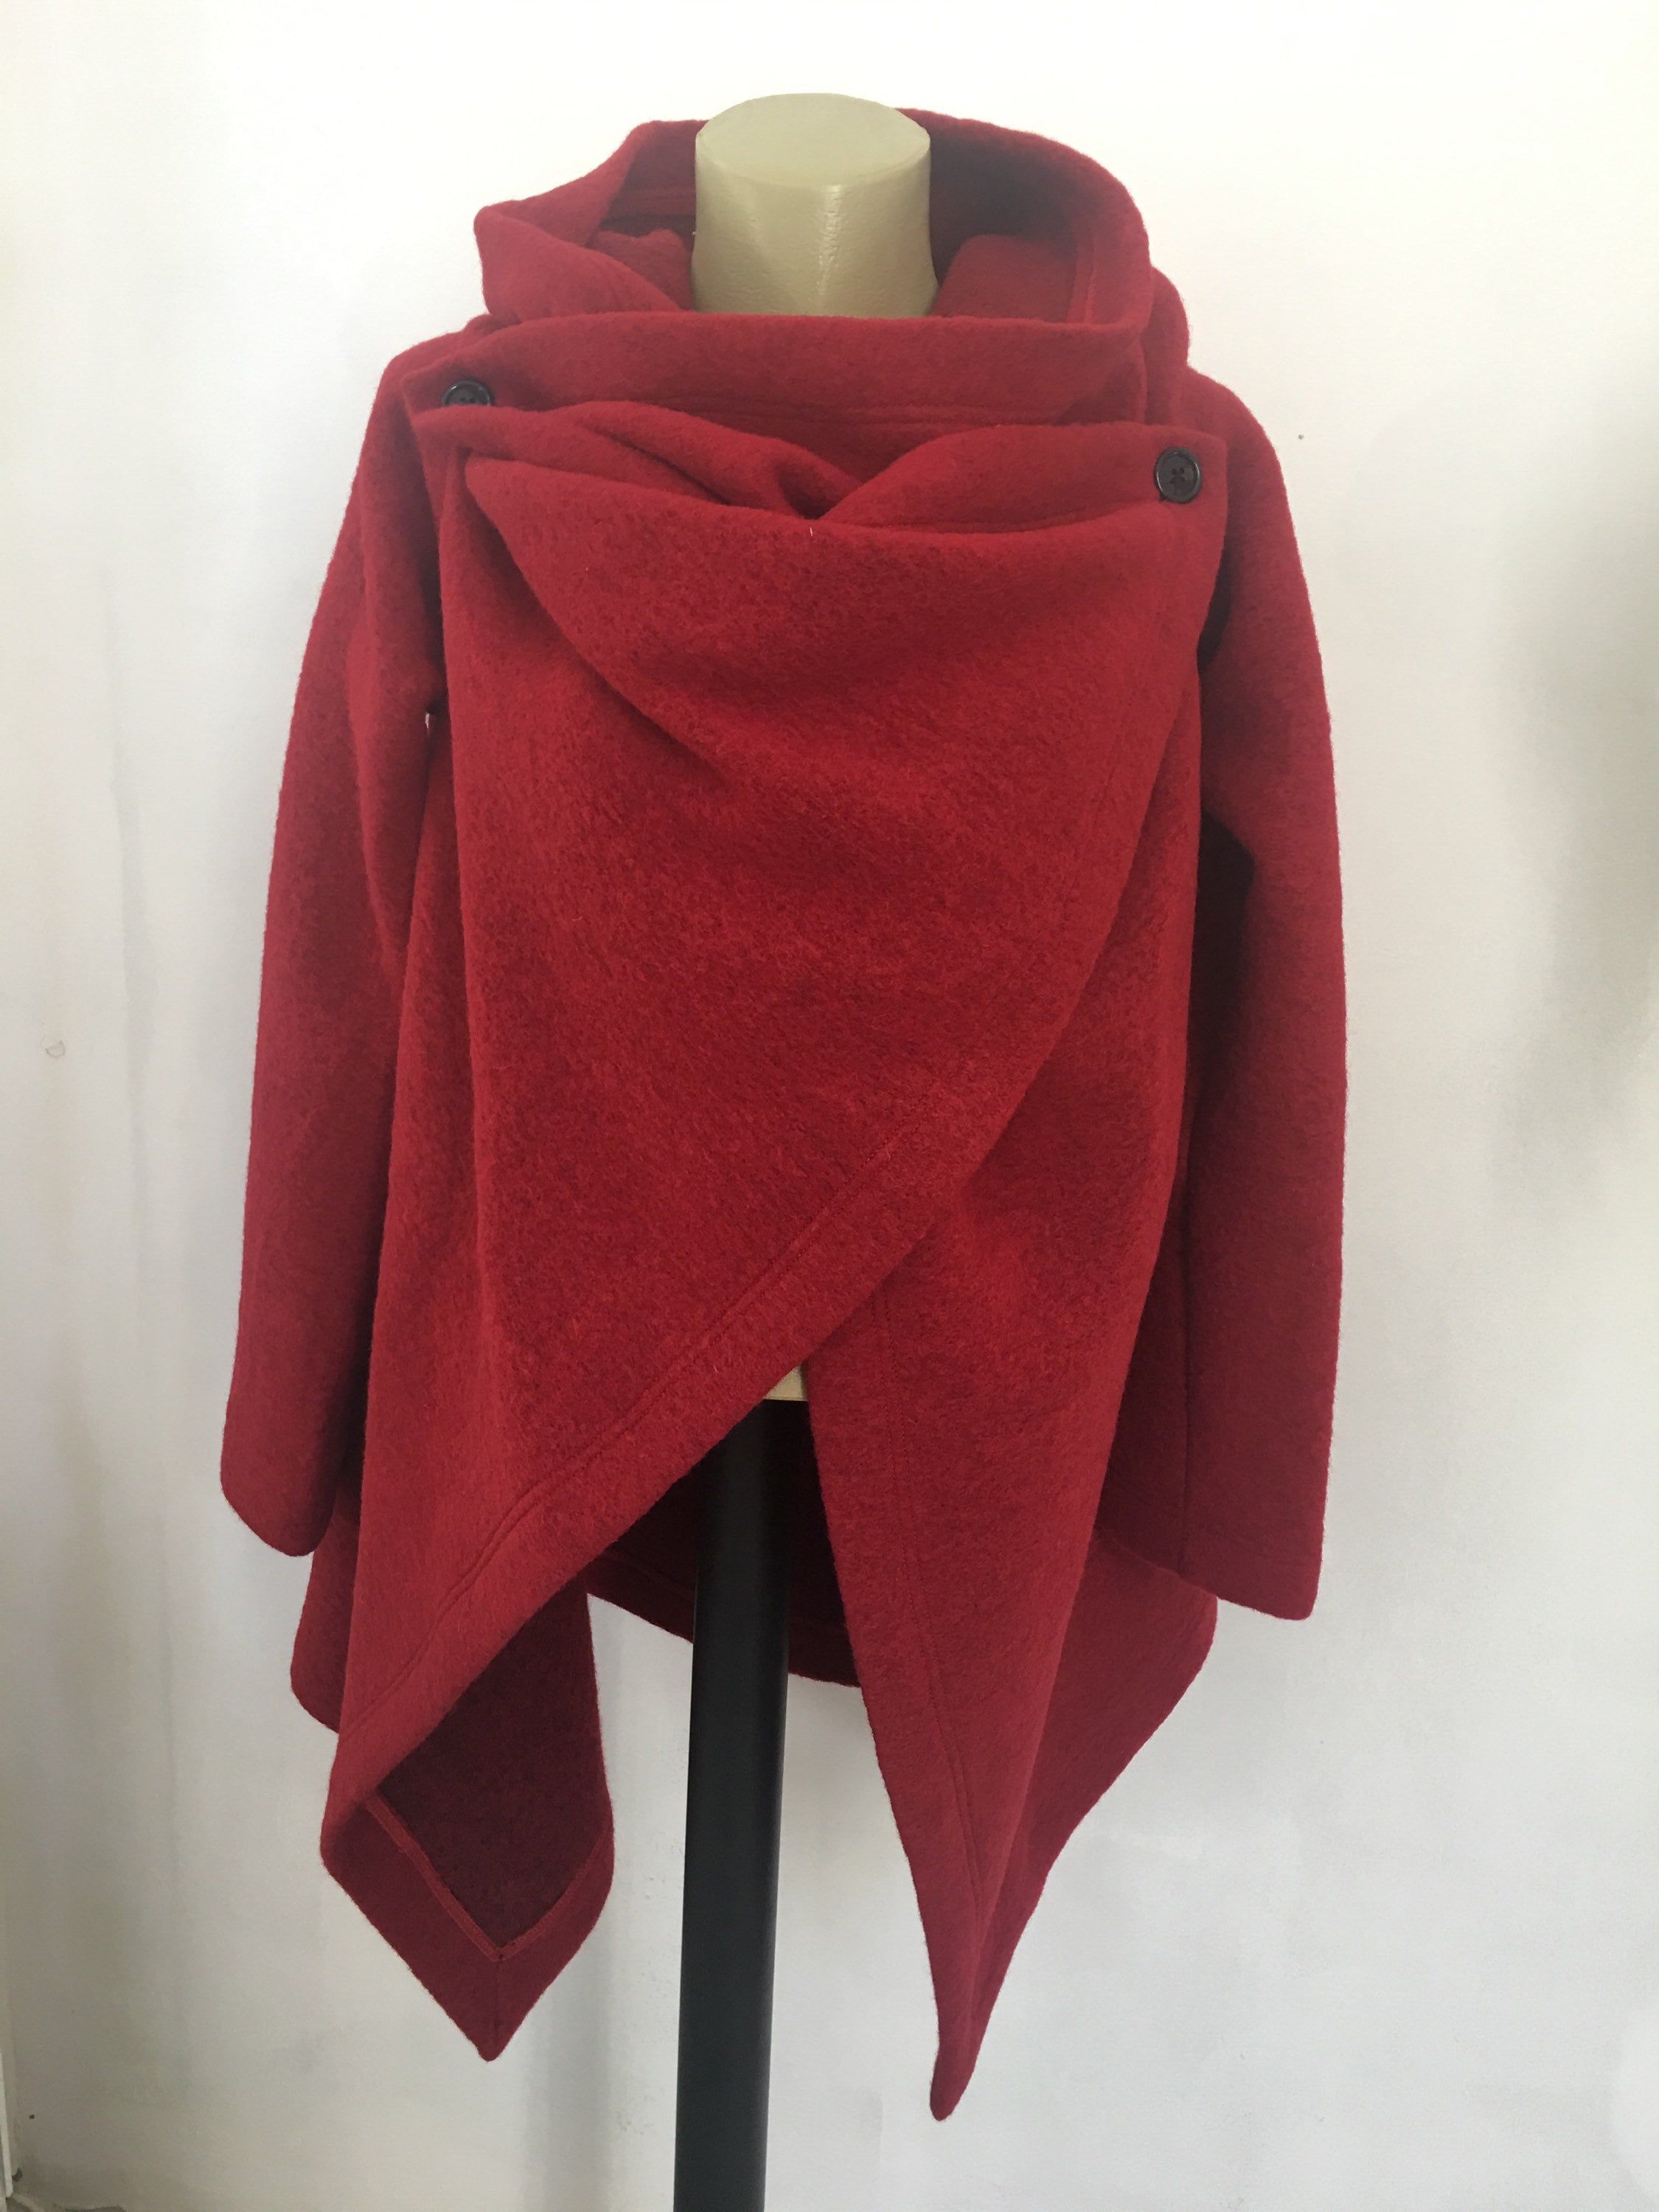 Red Square Blanket Wrap Coat Cardigan/ Cowl Neck | Etsy